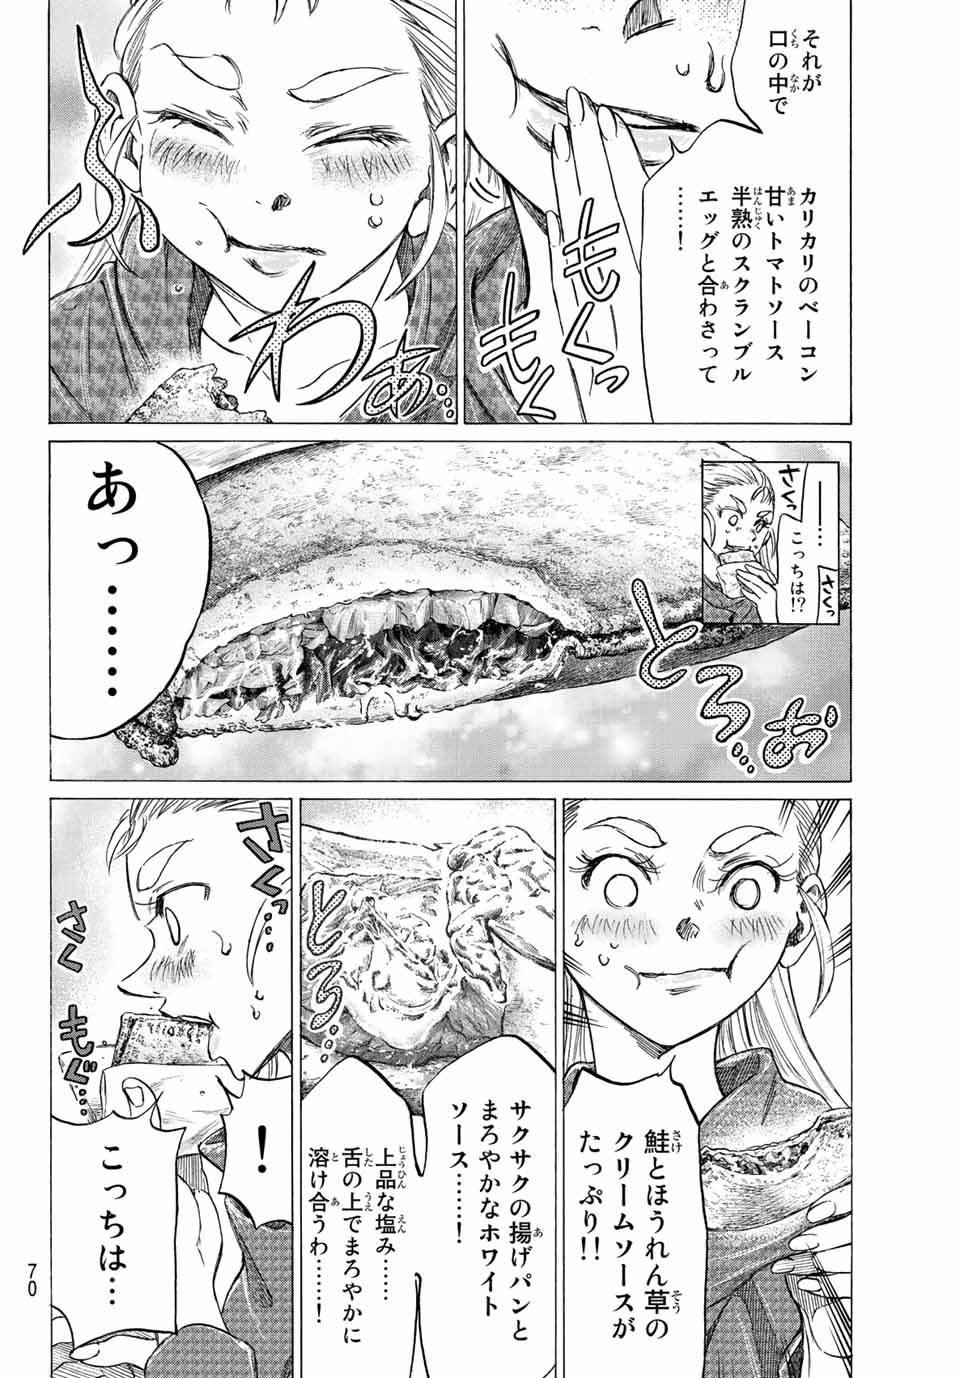 Fermat no Ryouri - Chapter 10.2 - Page 2